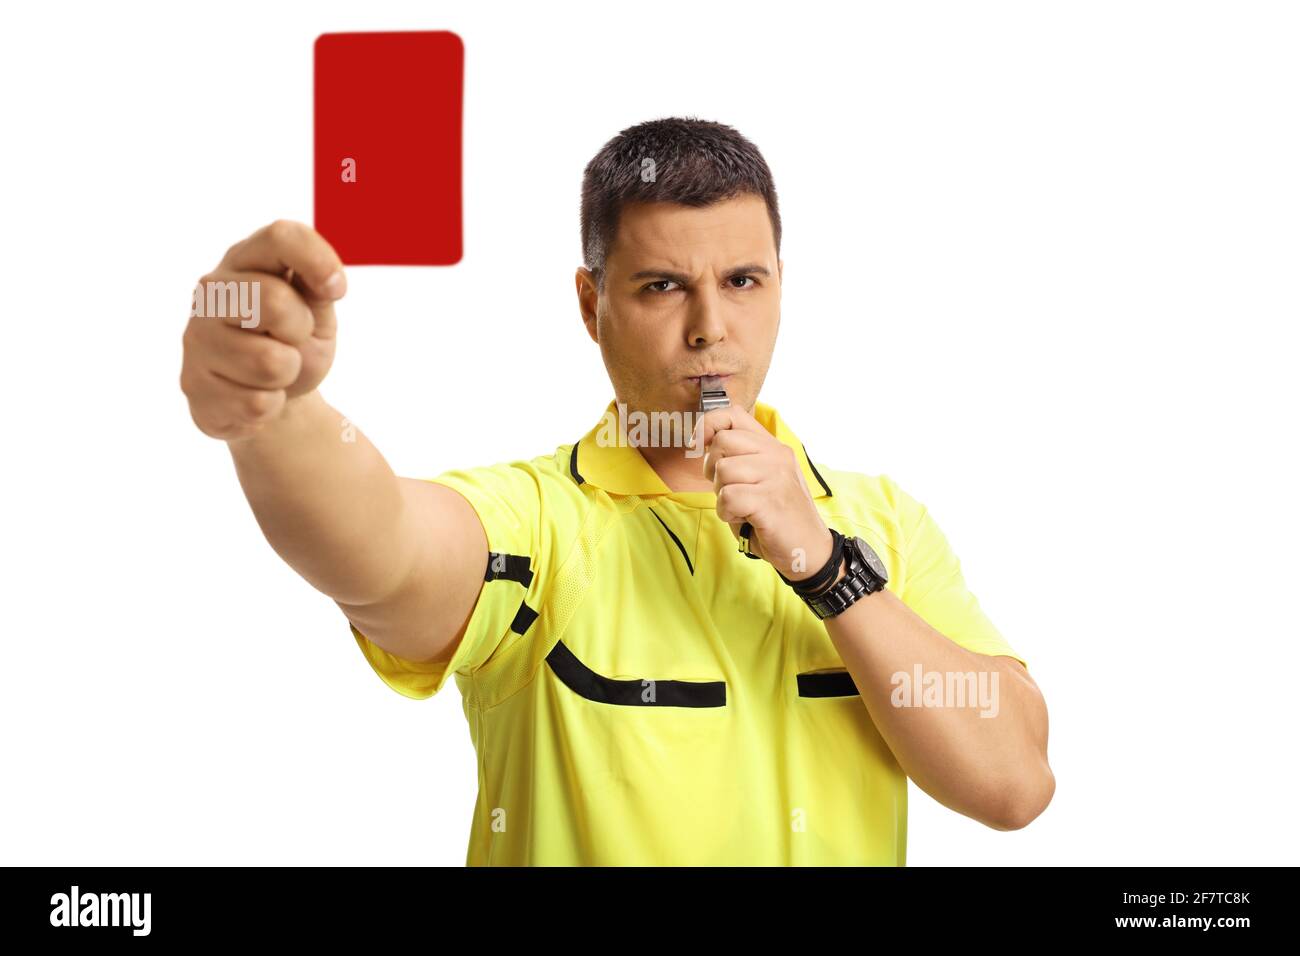 Serious football referee blowing a whistle and showing a red card isolated on white background Stock Photo